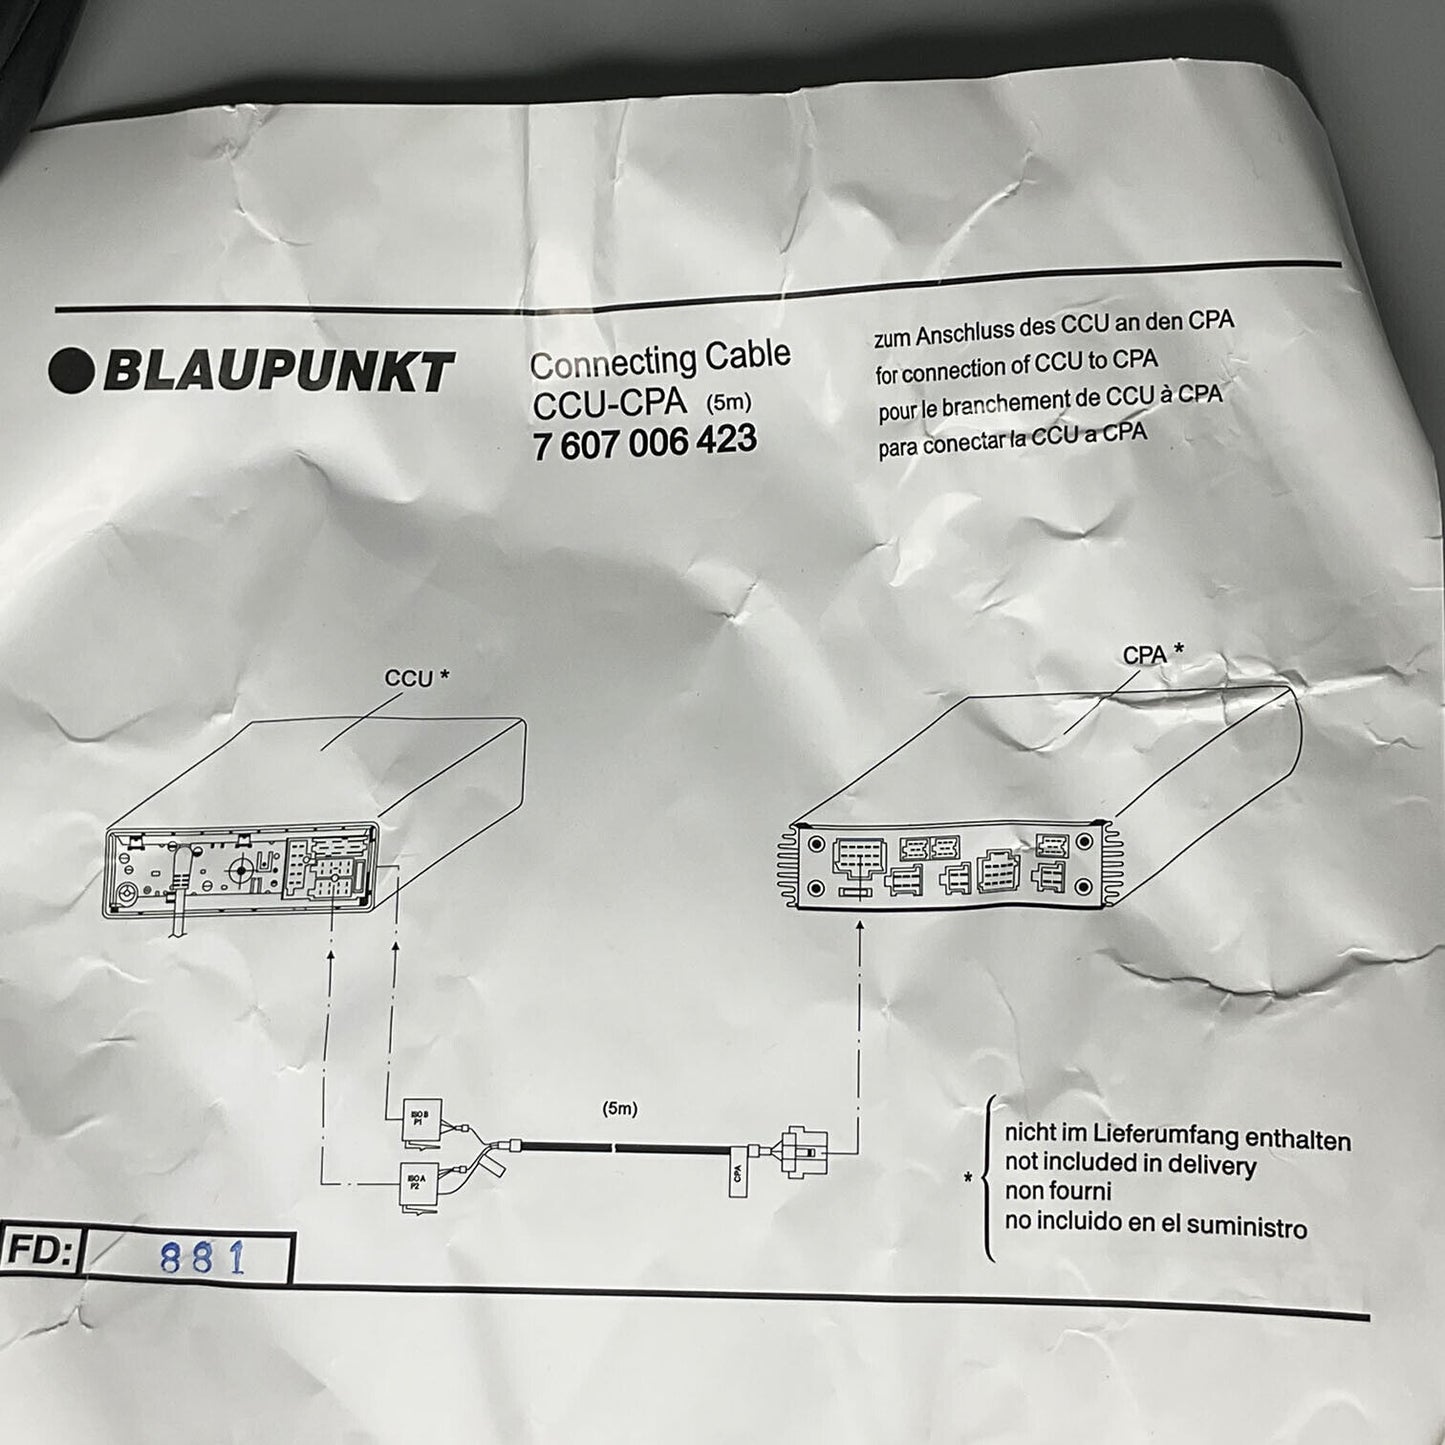 BLAUPUNKT CONNECTING CABLE CCU-CPA 5m For 7607006423